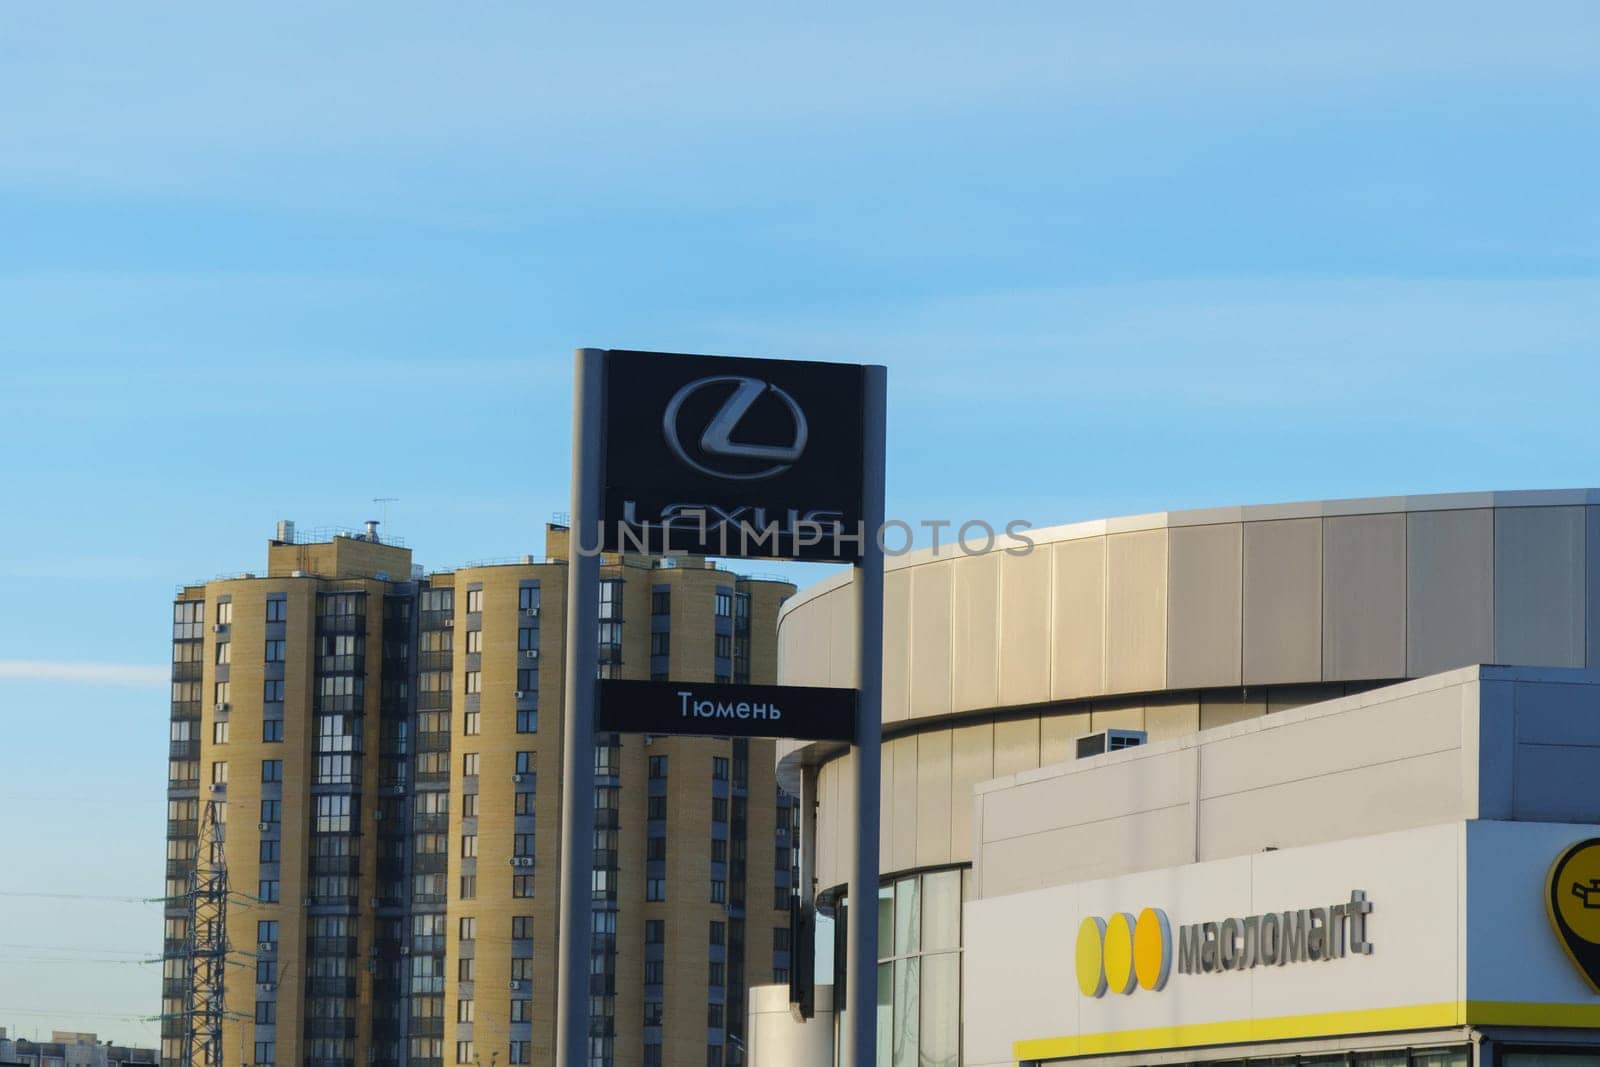 Tyumen, Russia-March 18, 2024: Sign displaying the Lexus logo for a car dealership stands prominently in front of a building. by darksoul72